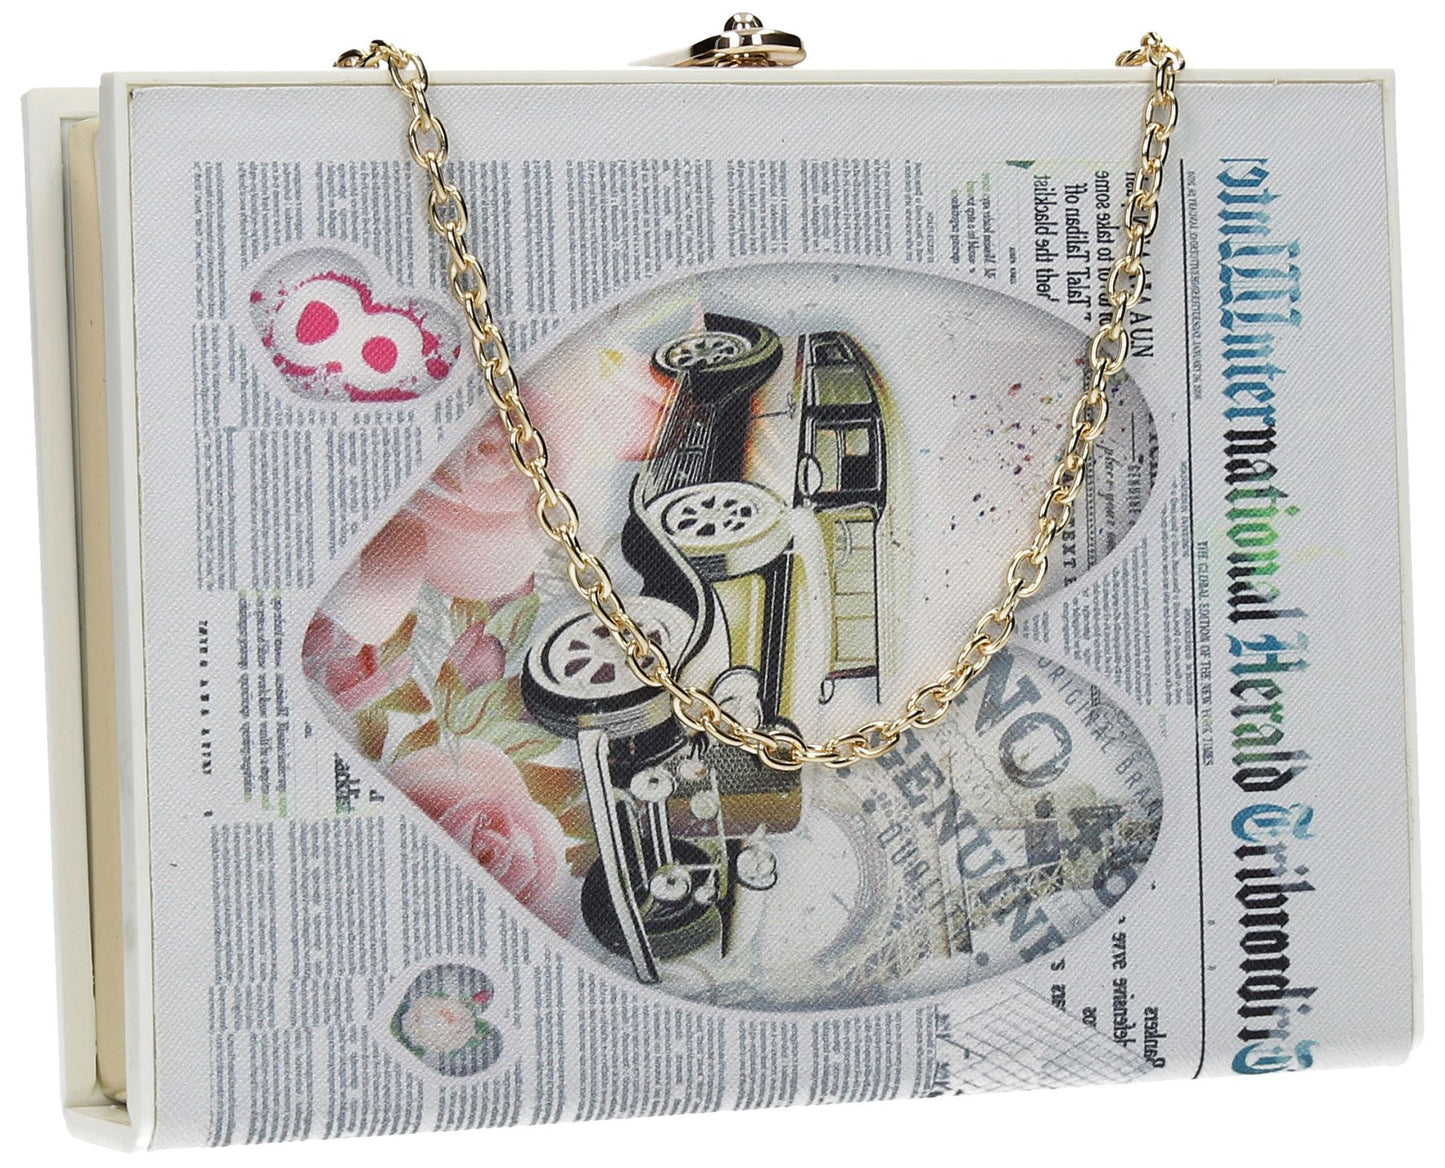 SWANKYSWANS Quirky Newspaper Box Clutch Cute Cheap Clutch Bag For Weddings School and Work